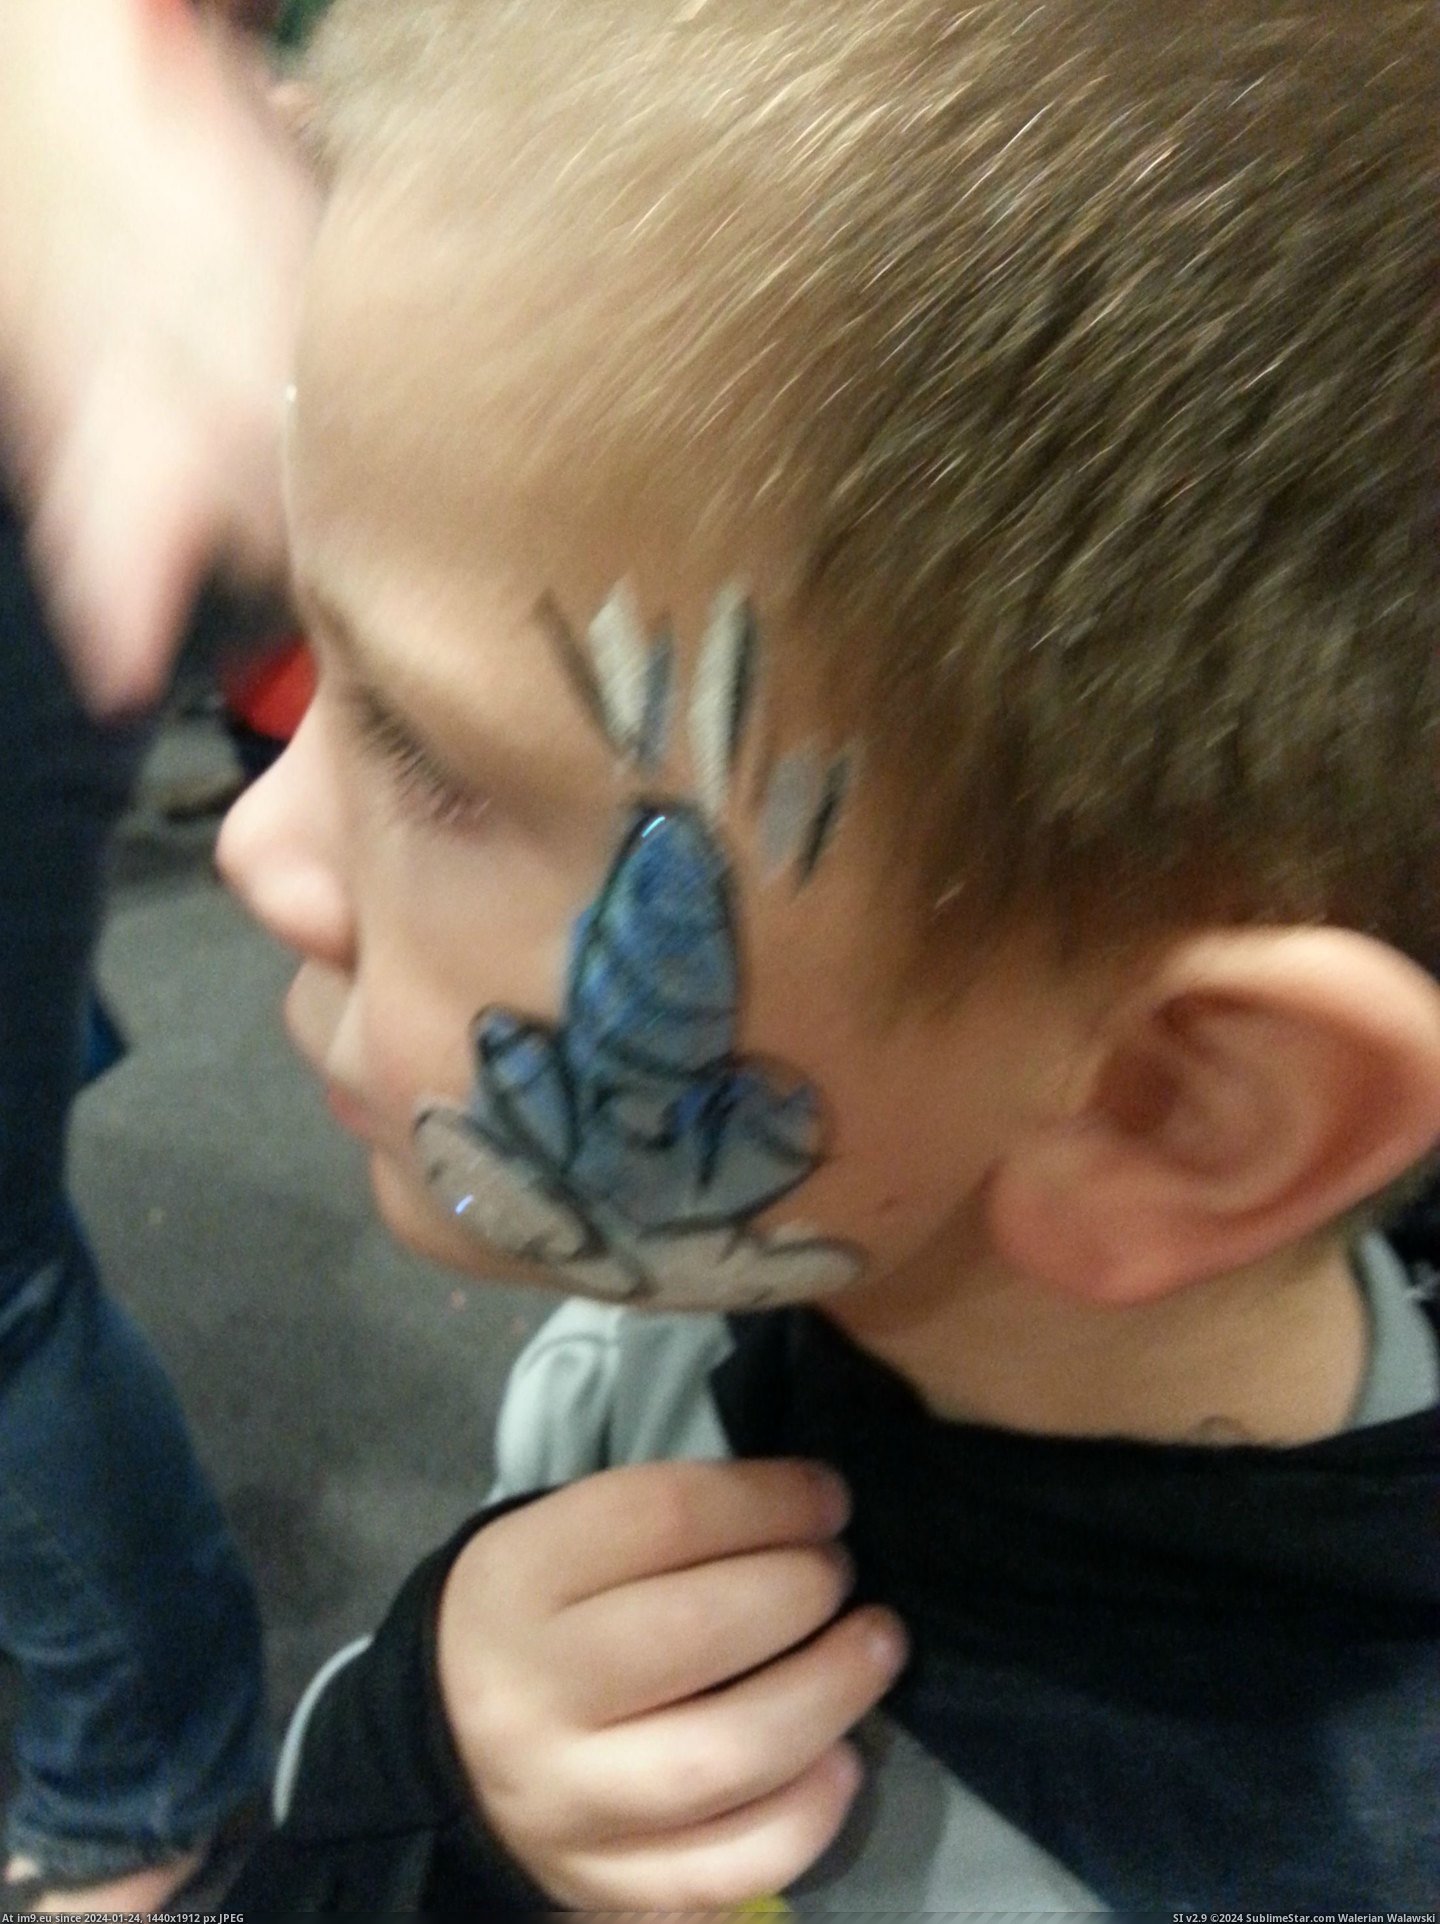 #Wtf #For #Face #Awkward #Evening #Clown #Rocket #Son #Church #Drew [Wtf] A clown drew this 'rocket' on my son's face at a church function. Made for an awkward evening. [OC] Pic. (Изображение из альбом My r/WTF favs))